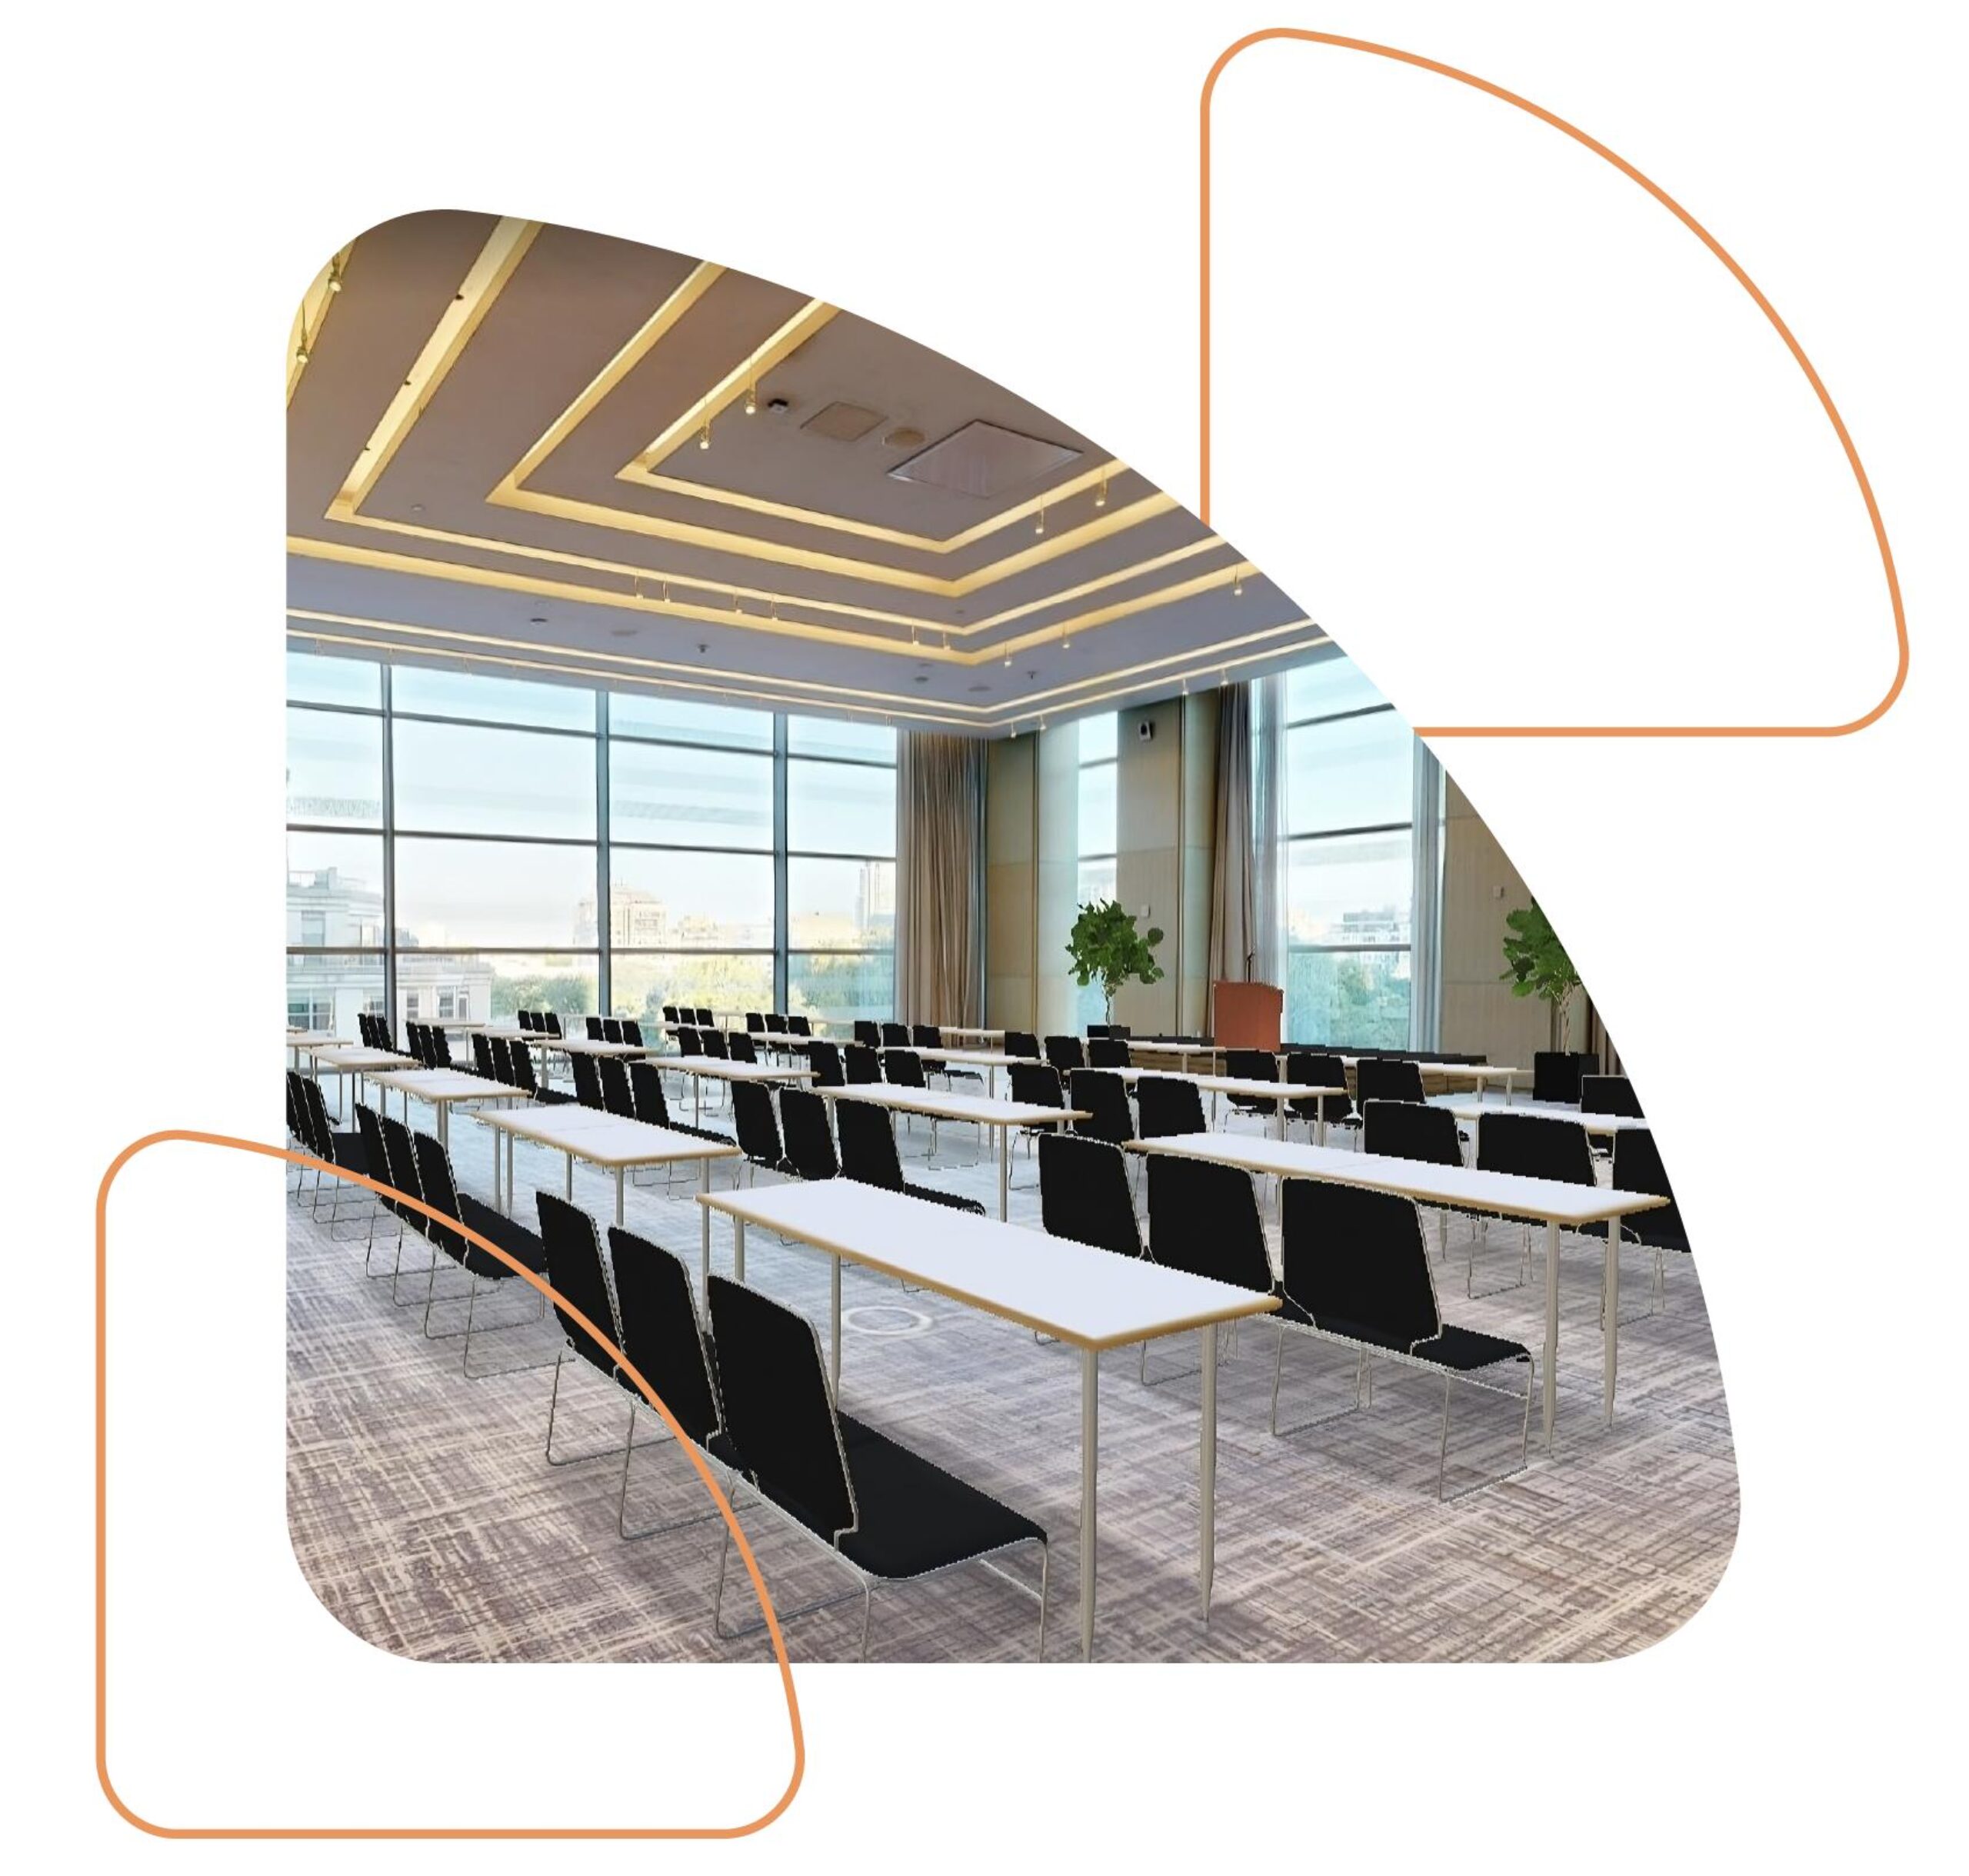 A conference room with neatly arranged tables and chairs facing a podium, large windows in the background, and modern ceiling lighting, meticulously designed through 3D Event Diagramming.